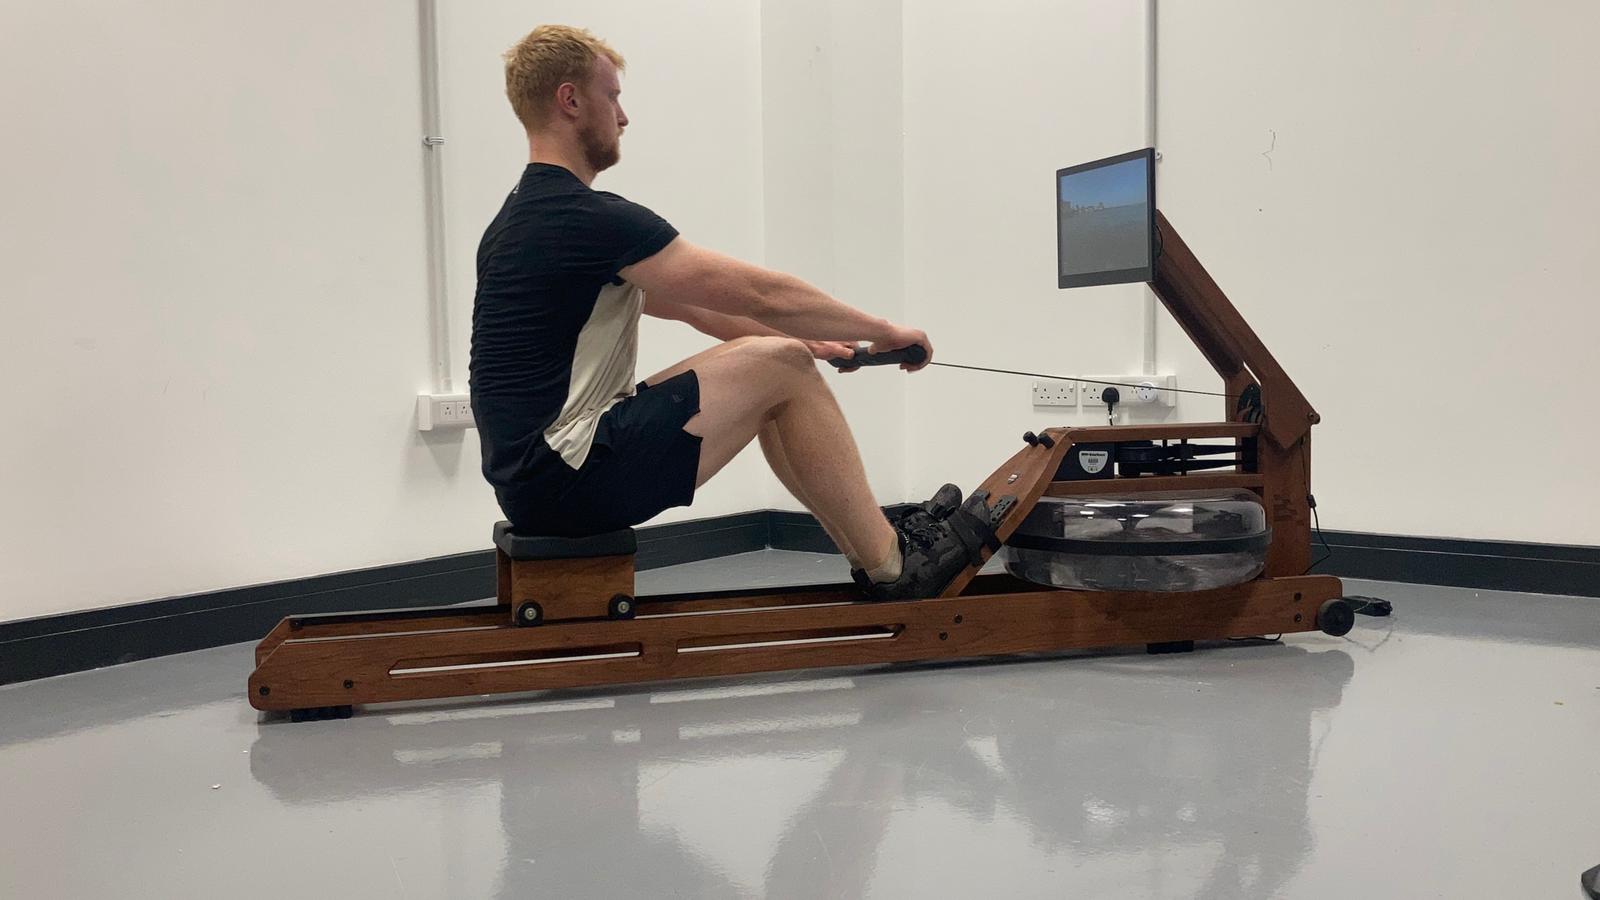 Ergatta Rower tested by Live Science authors